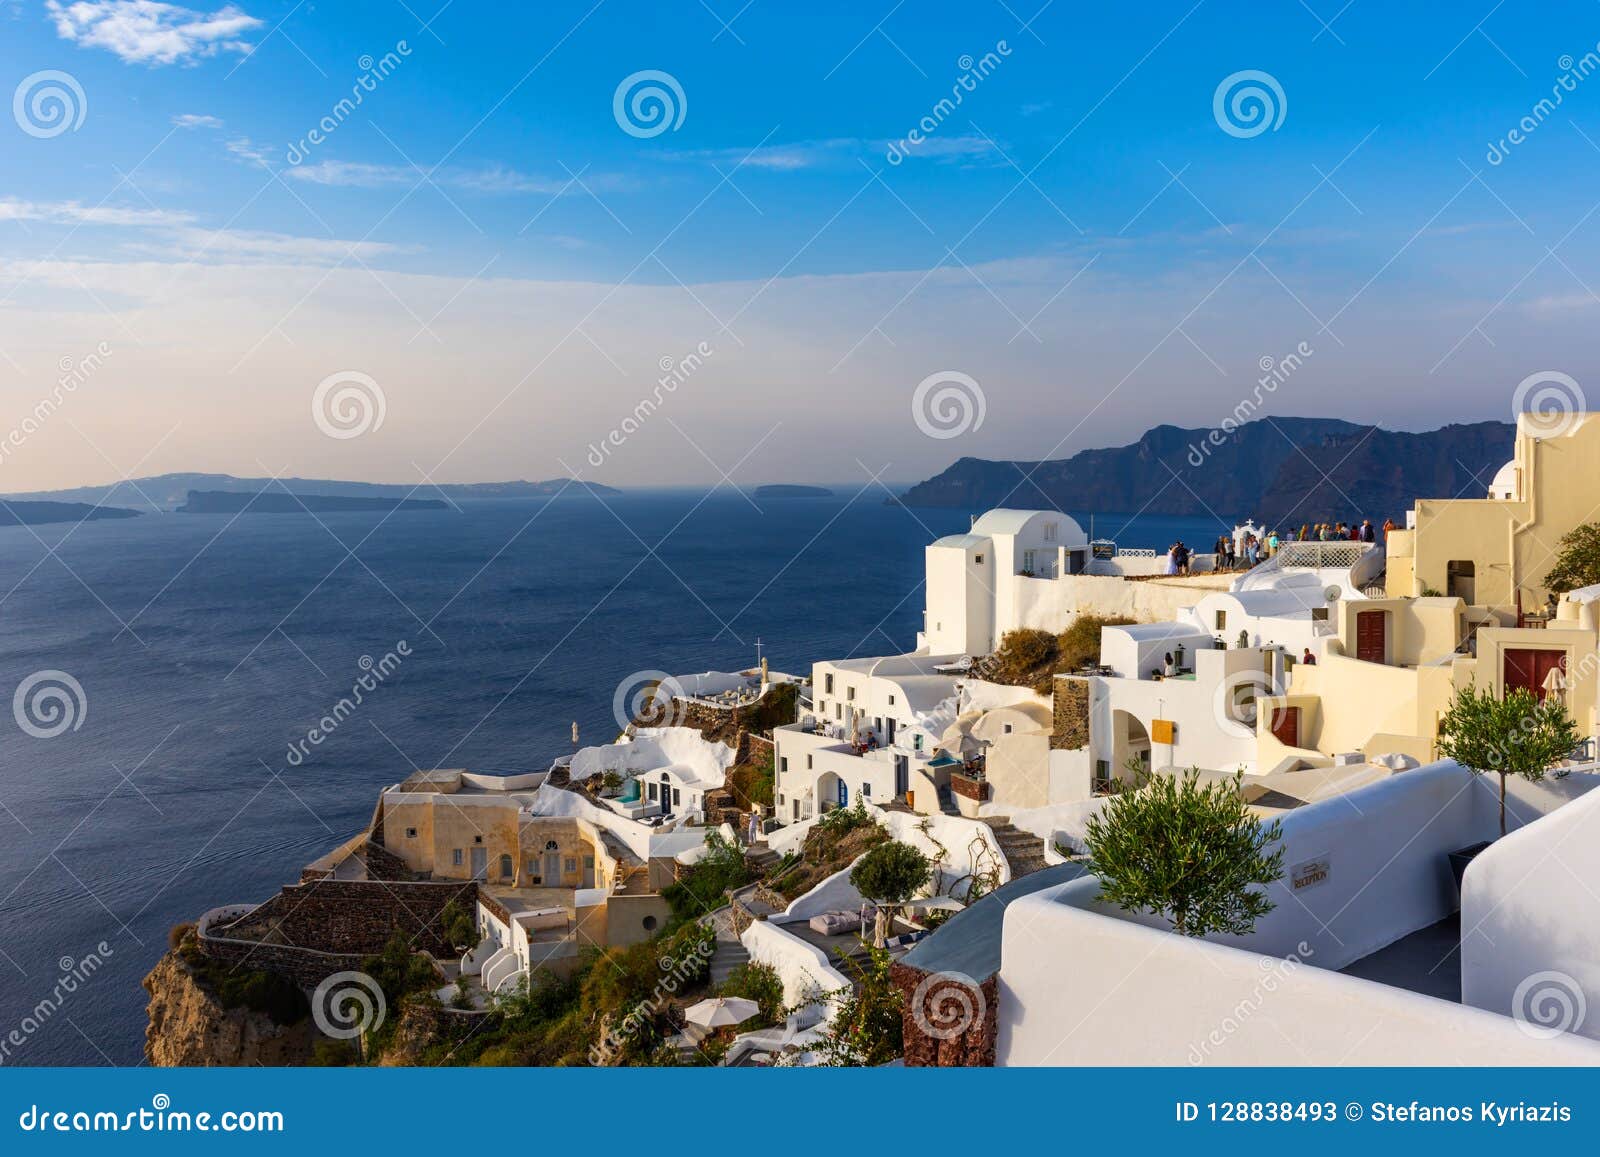 Unique Architecture of Oia Santorini`s Houses on the Cliff Editorial